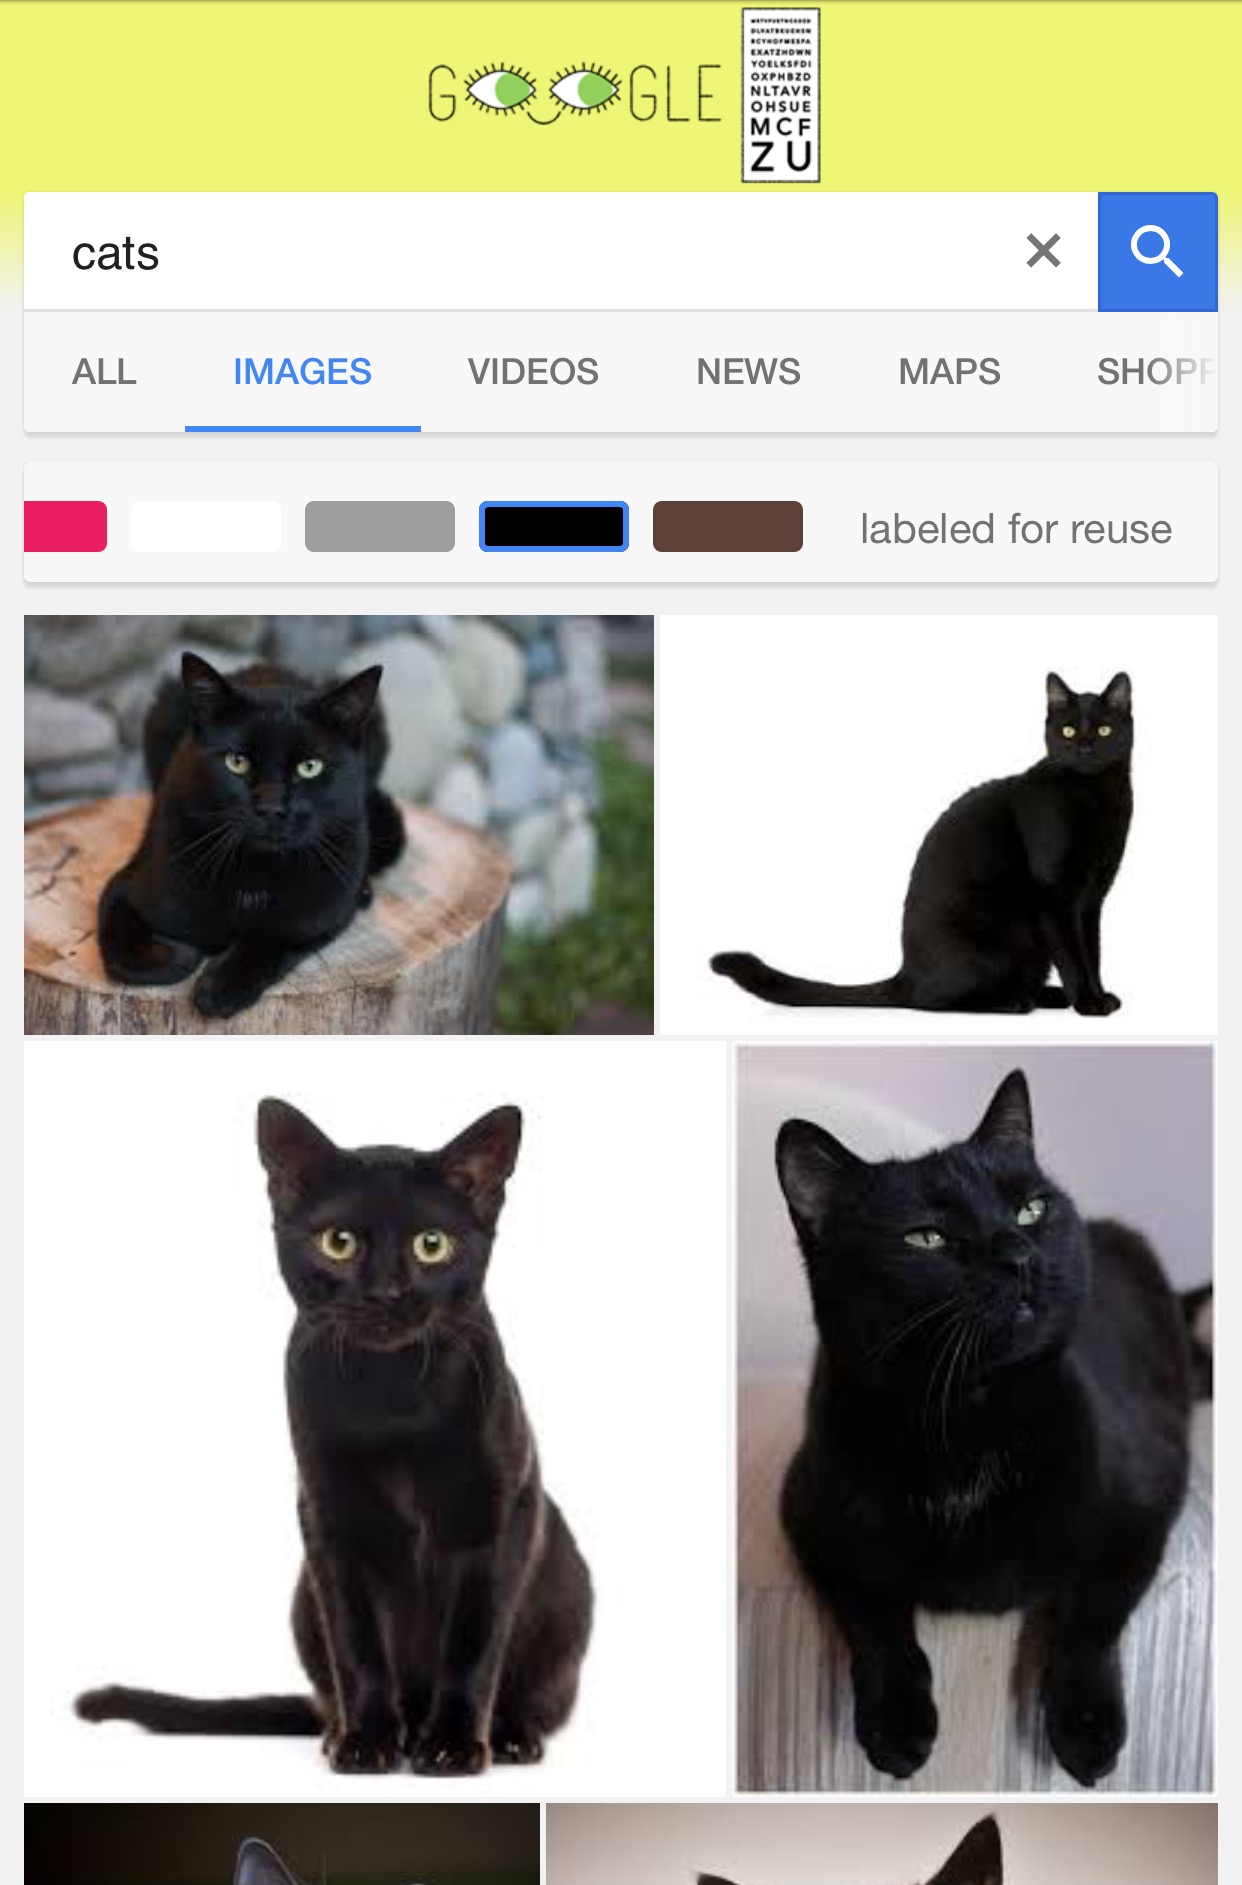 New Filters Added to Google Image Search